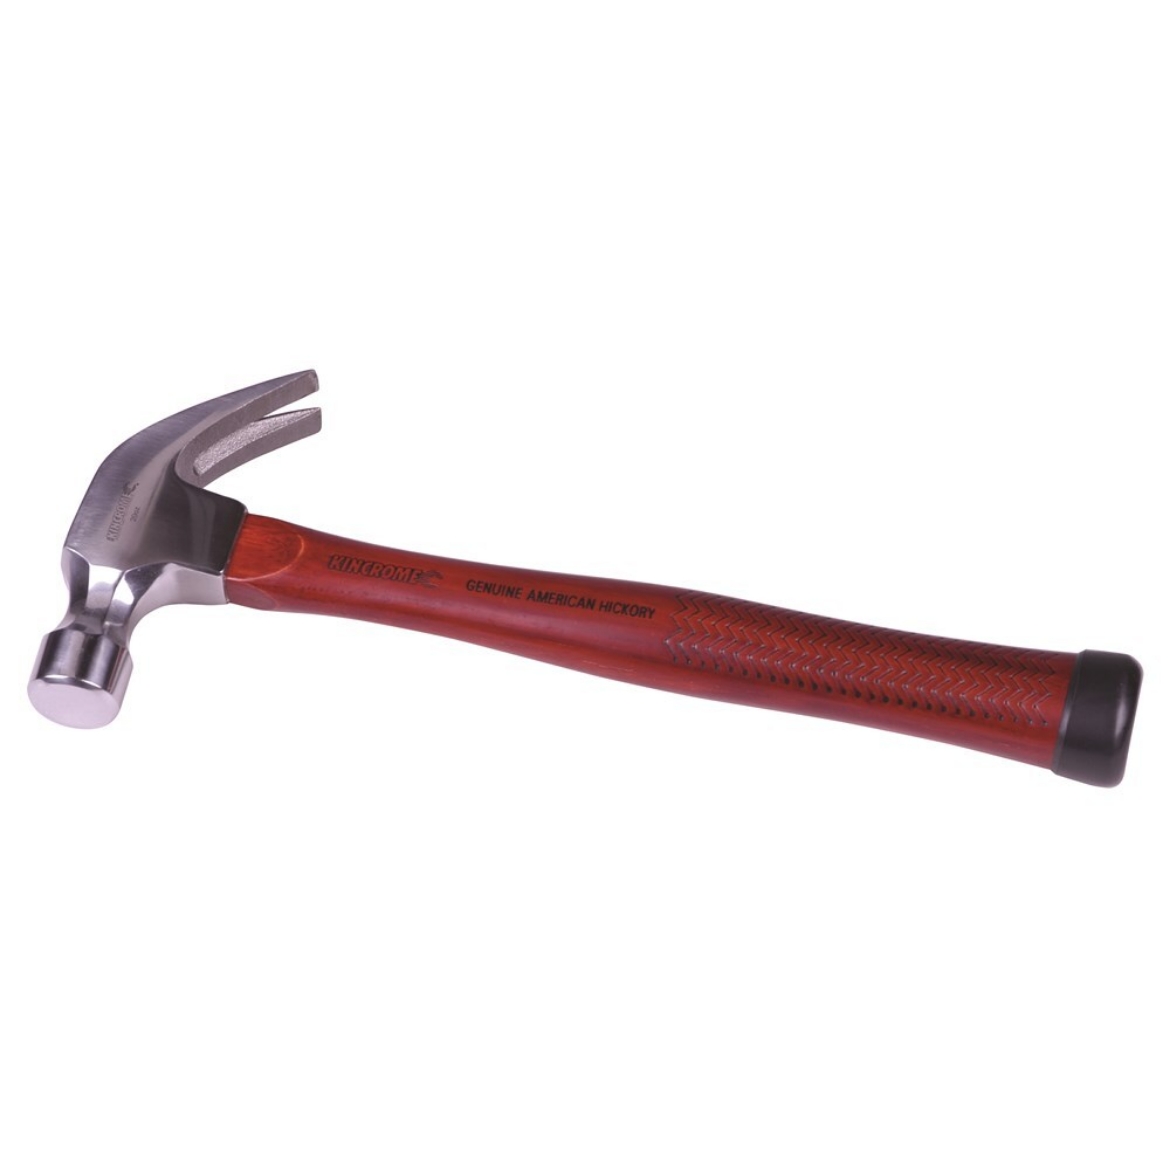 Picture of Claw Hammer 20oz/567g, Hickery Handle 345mm Long